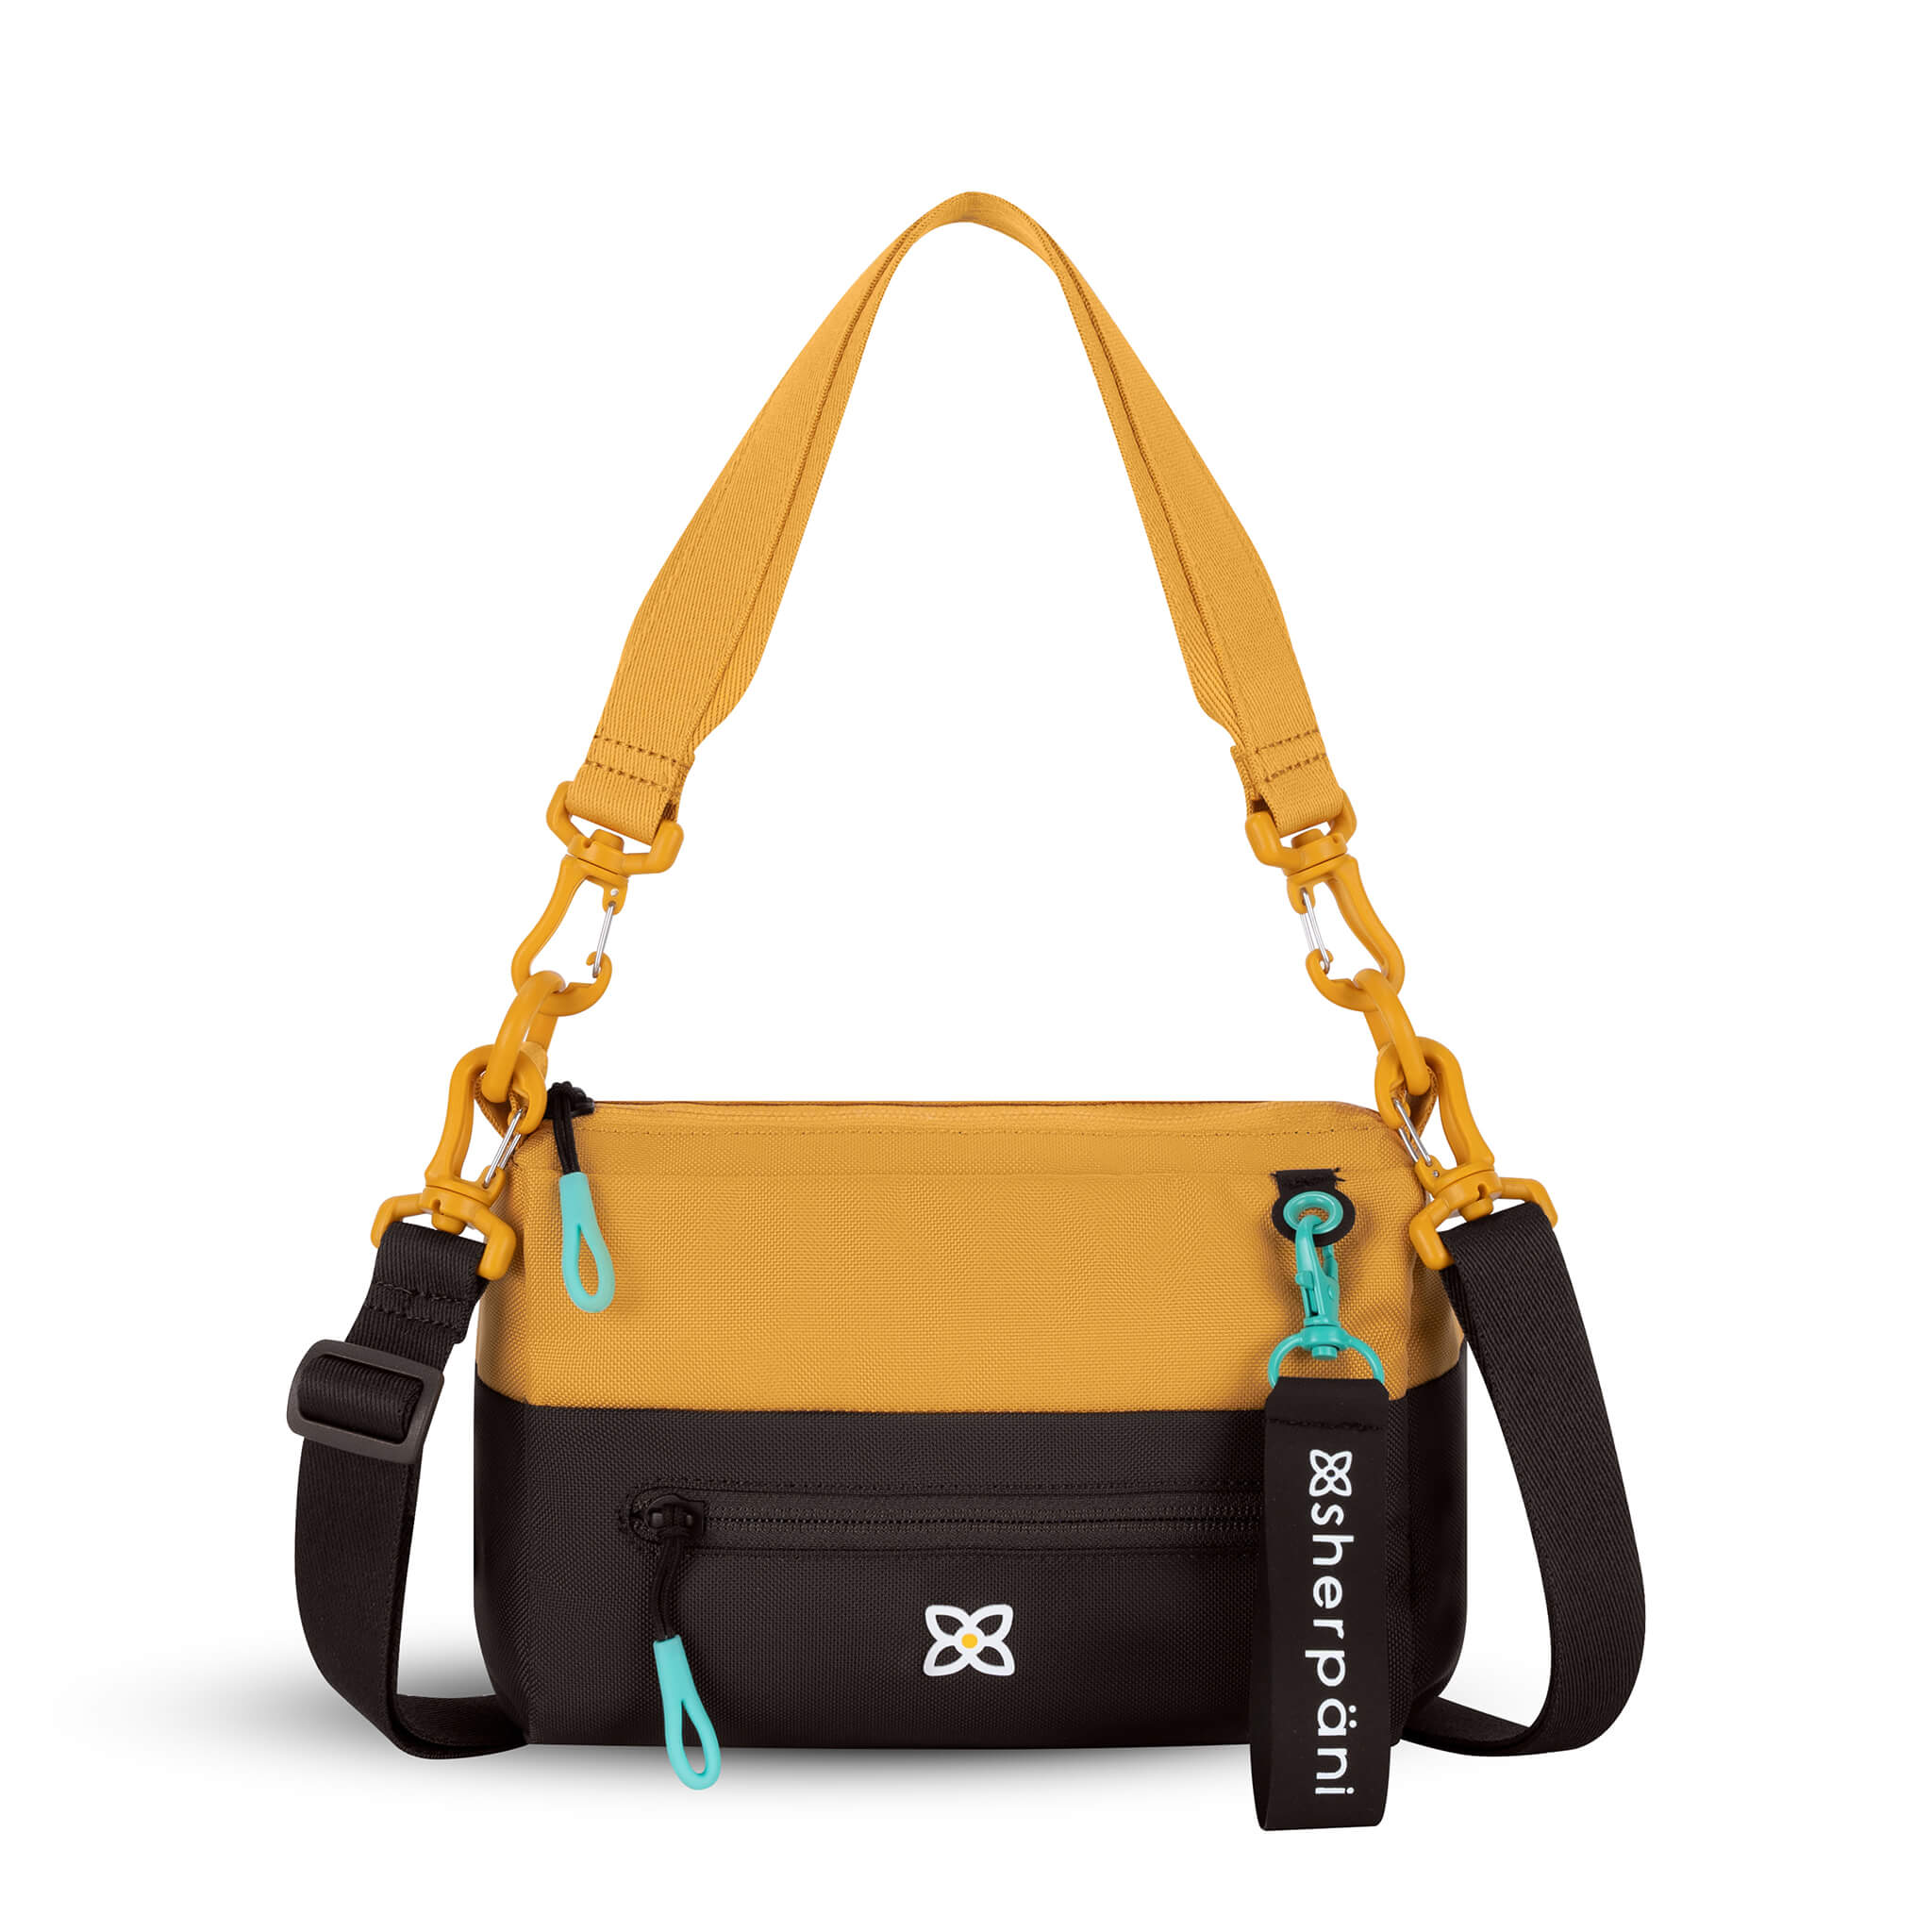 Flat front view of Sherpani mini shoulder bag, the Skye in Sundial. Skye features include RFID security, detachable keychain, outside zipper pocket, two inside zipper pockets and two removable straps: a short shoulder strap and a longer adjustable crossbody strap. The Sundial color is two-toned in yellow and dark brown with turquoise accents. 